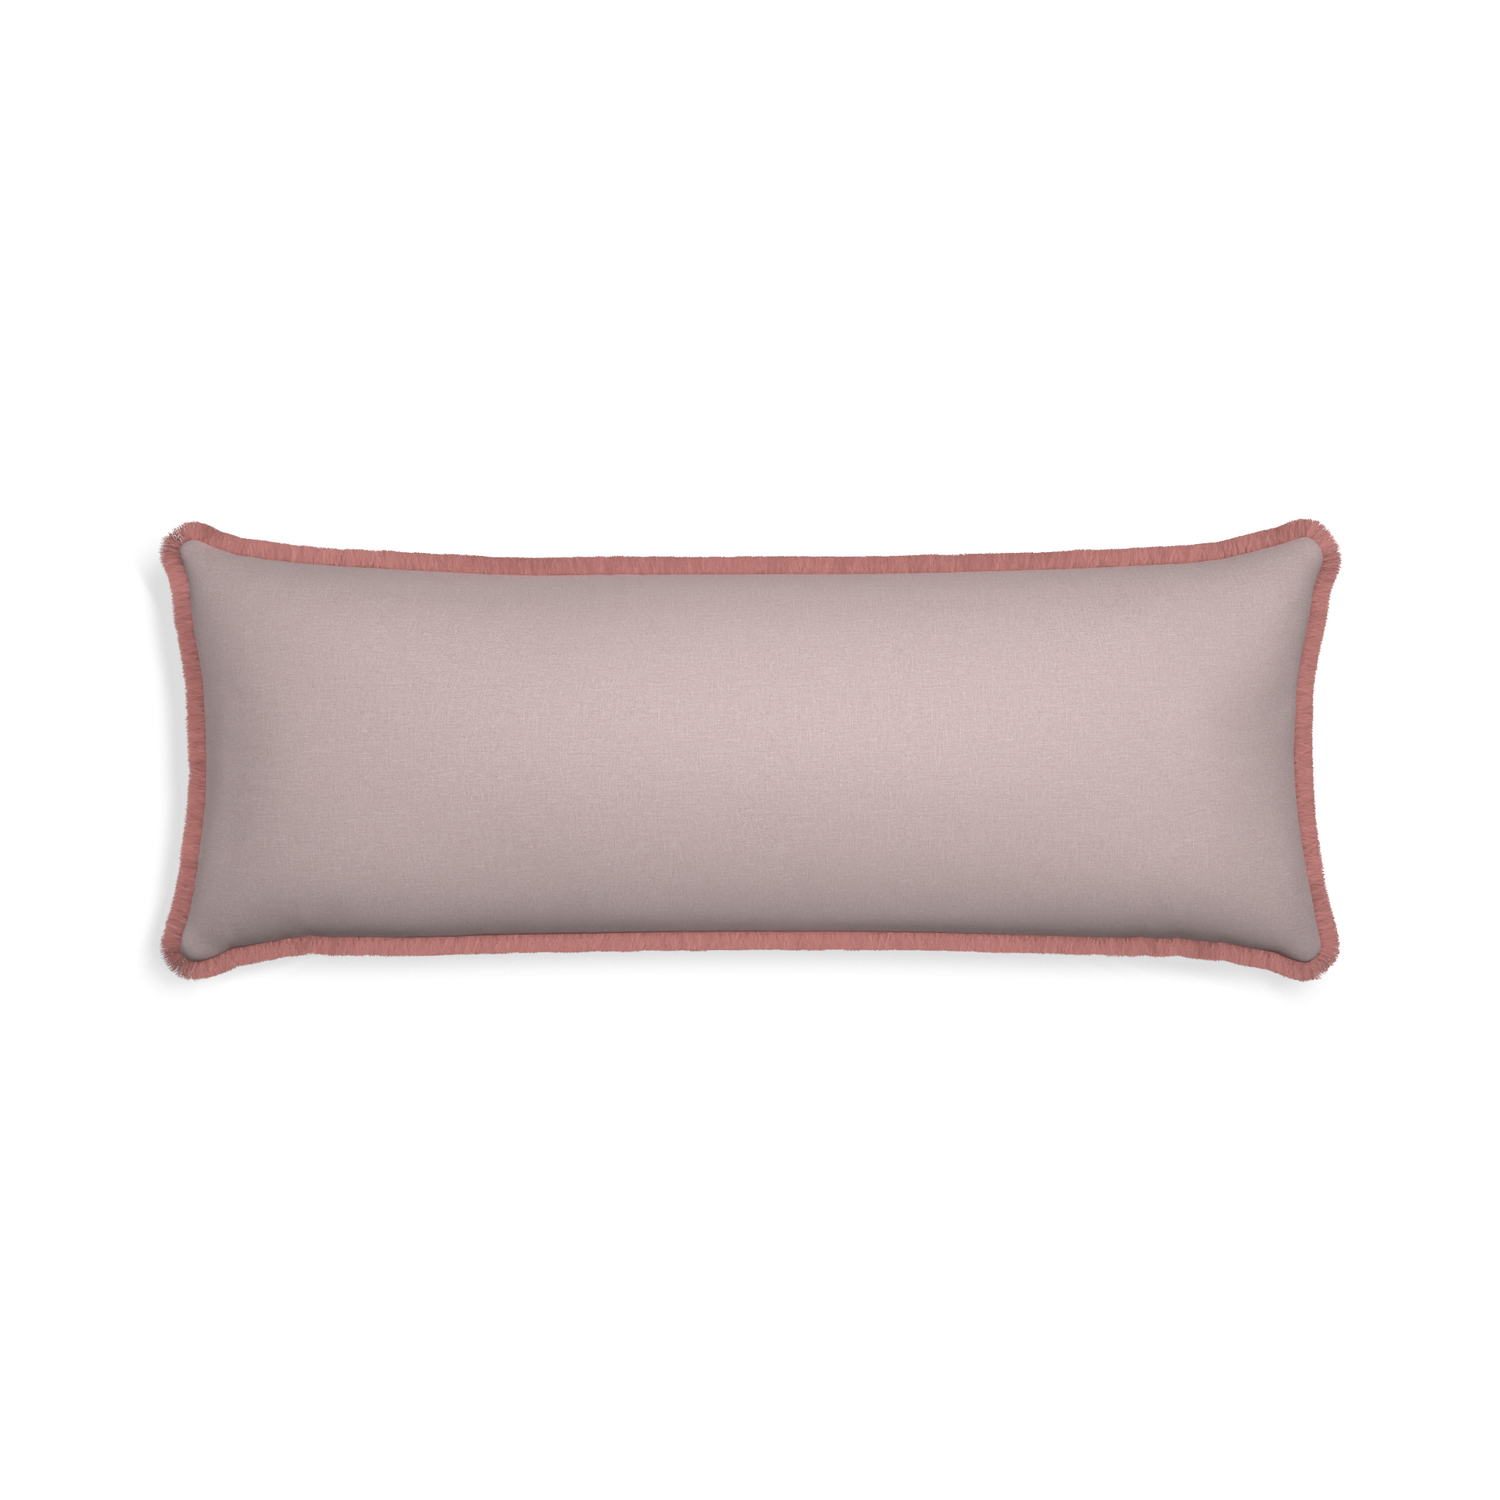 Xl-lumbar orchid custom mauve pinkpillow with d fringe on white background